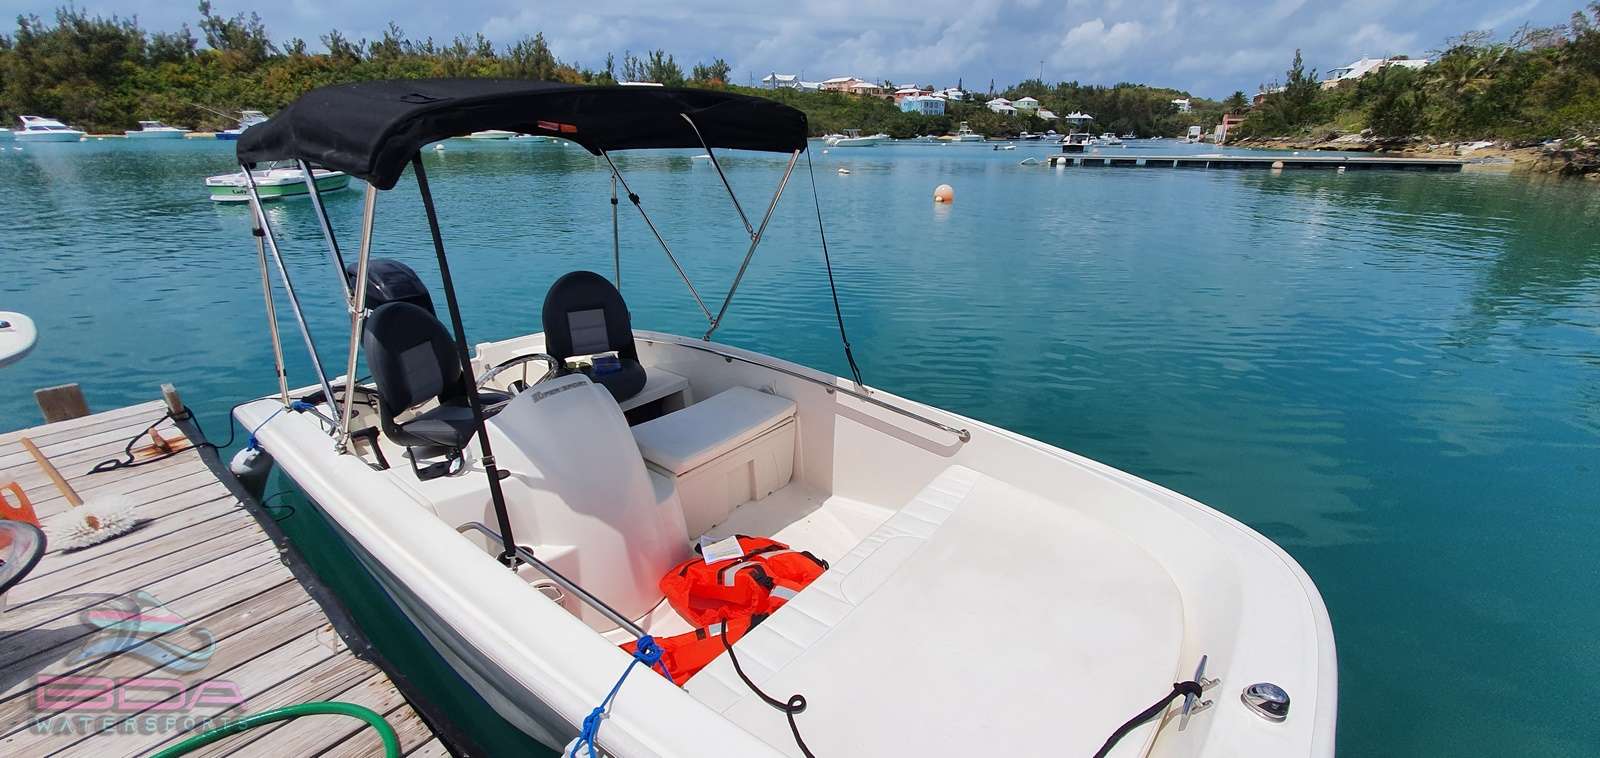 Gallery of Boat Rentals in Bermuda <p>Boston Whaler Boats in Action</p>